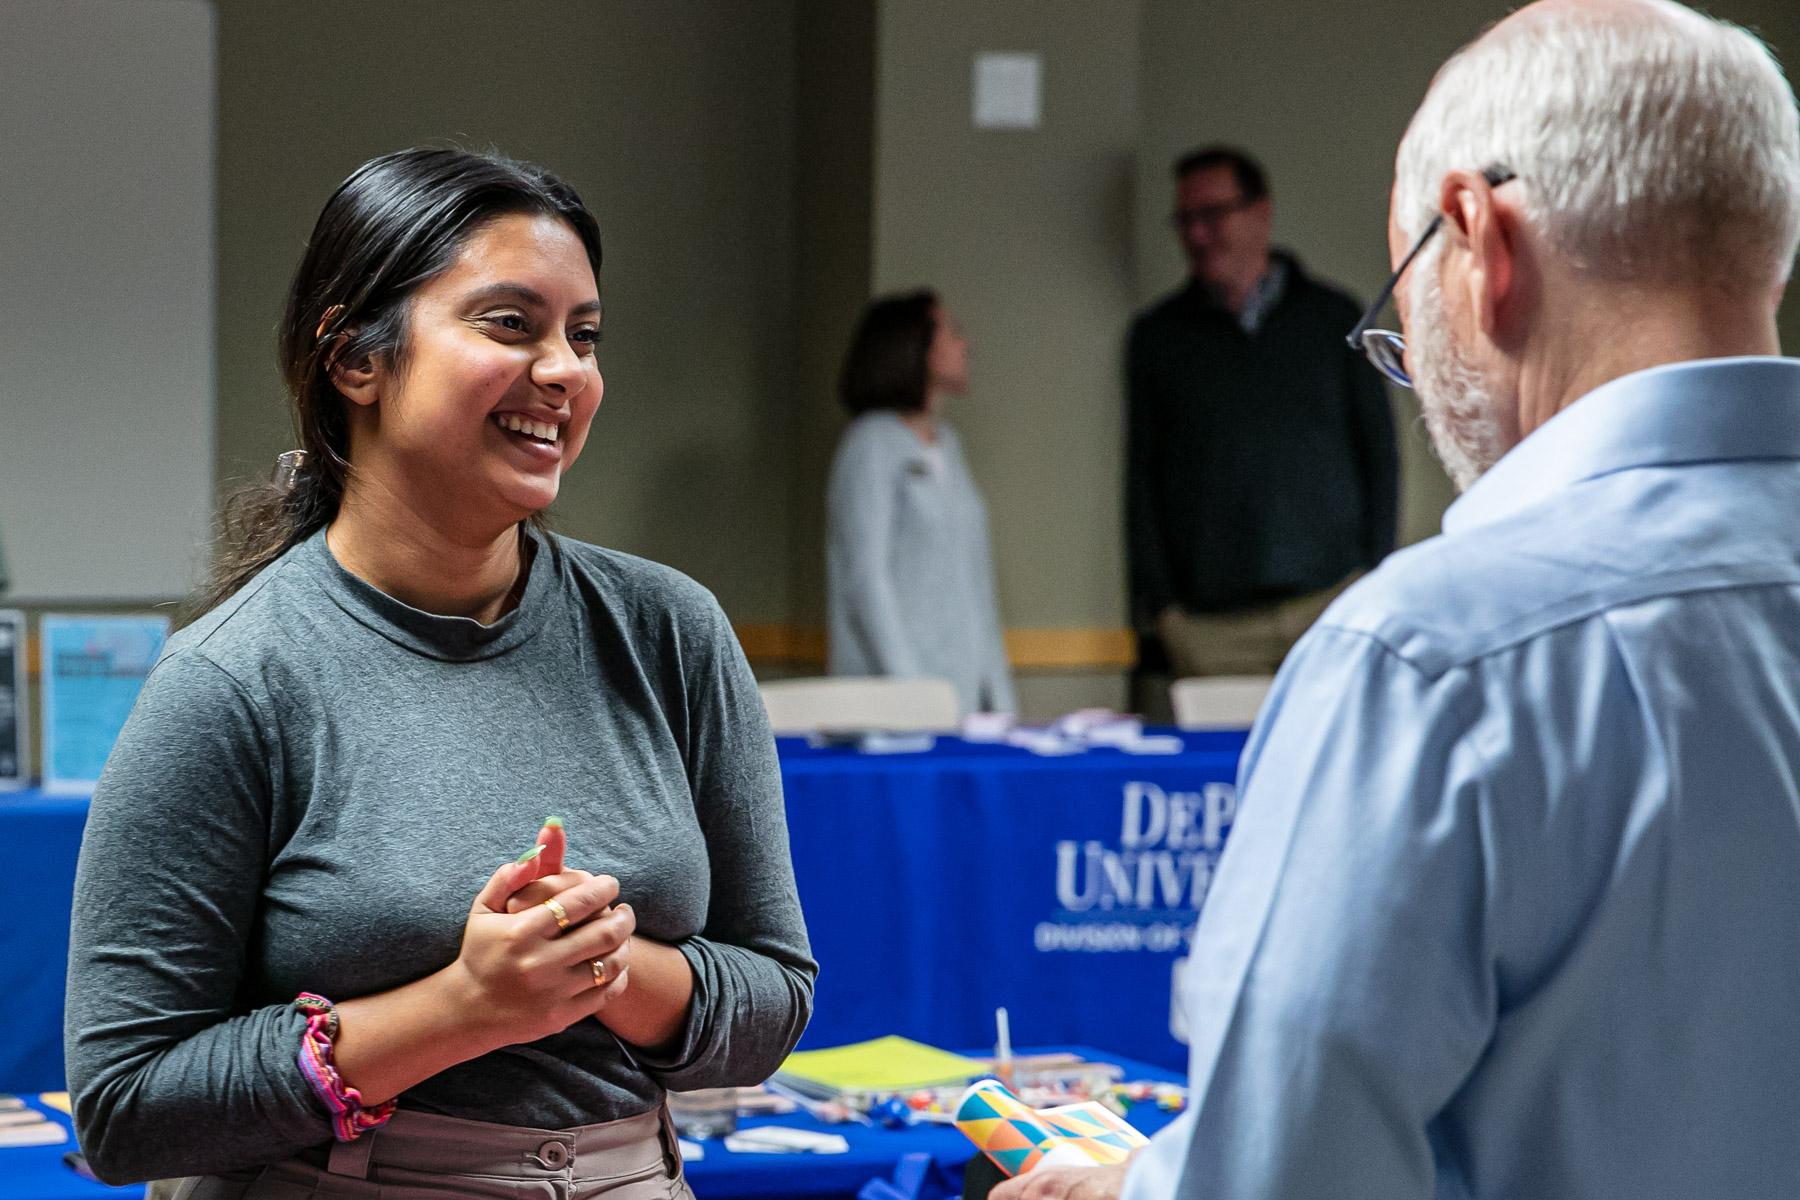 Representatives from Health Promotion and Wellness was in attendance to share information reguarding health programs beneficial for both students and faculty. (DePaul University/Randall Spriggs)